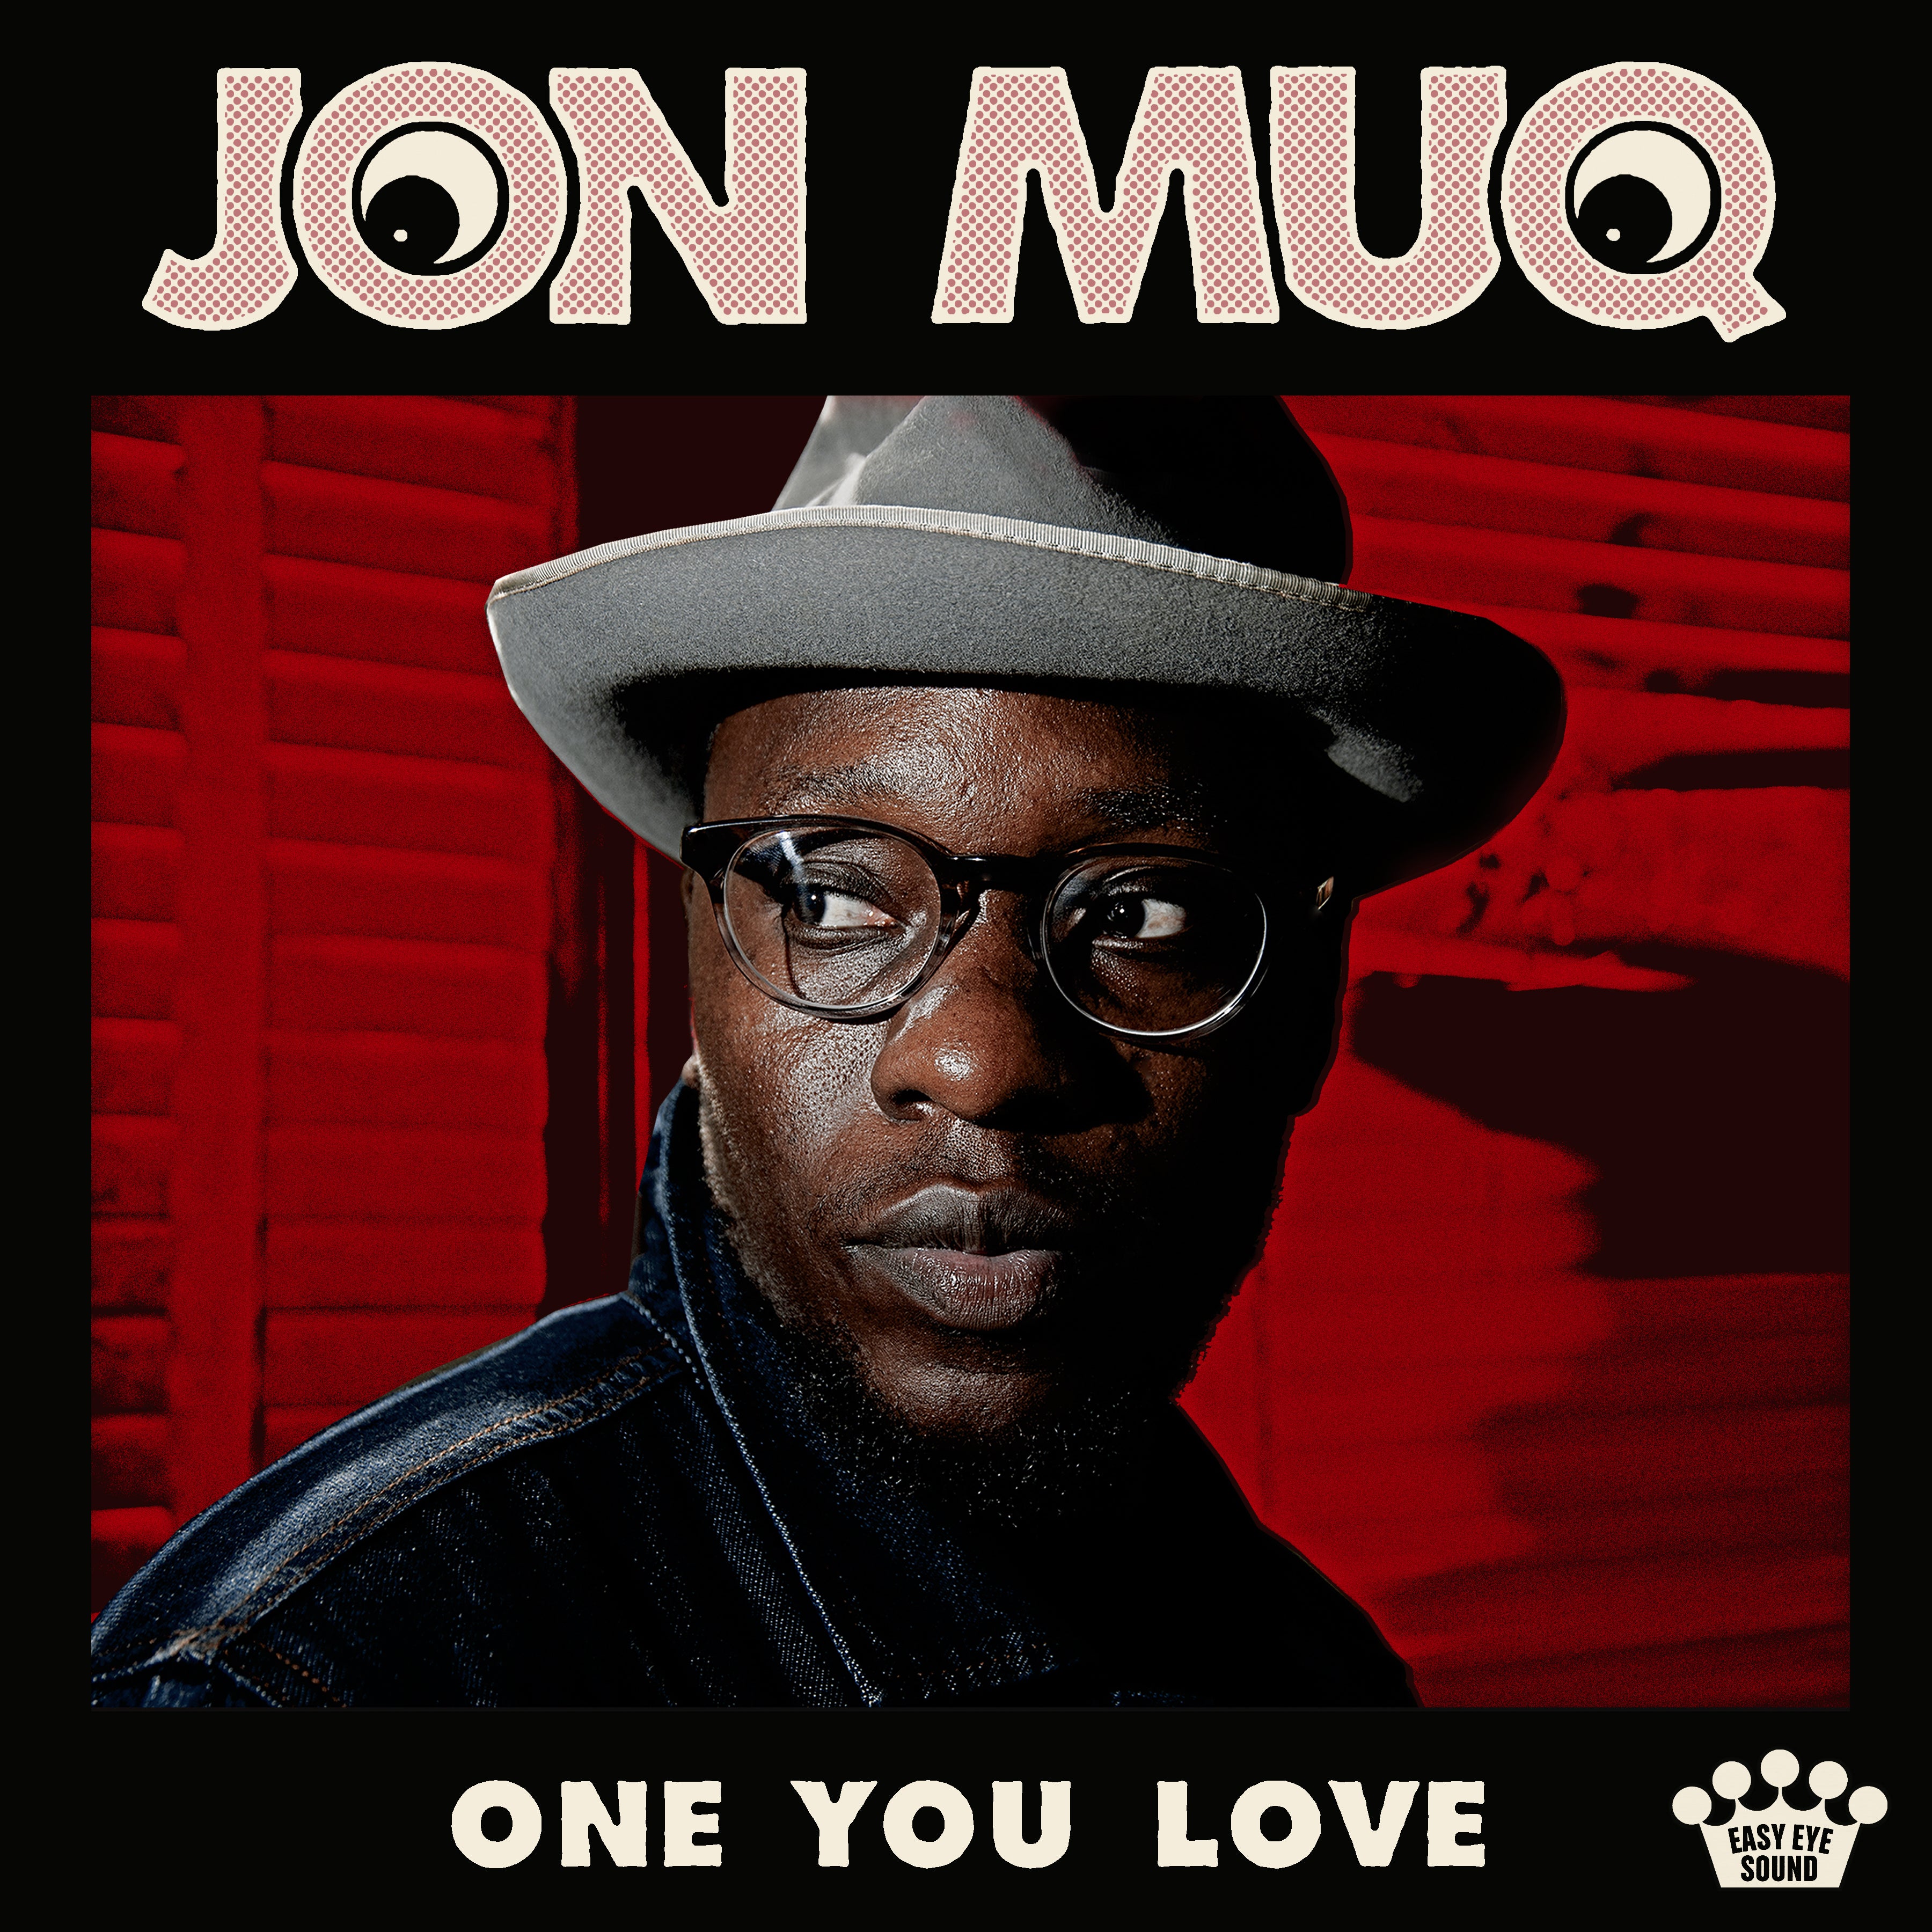 "One You Love" from the upcoming Jon Muq album is out now!